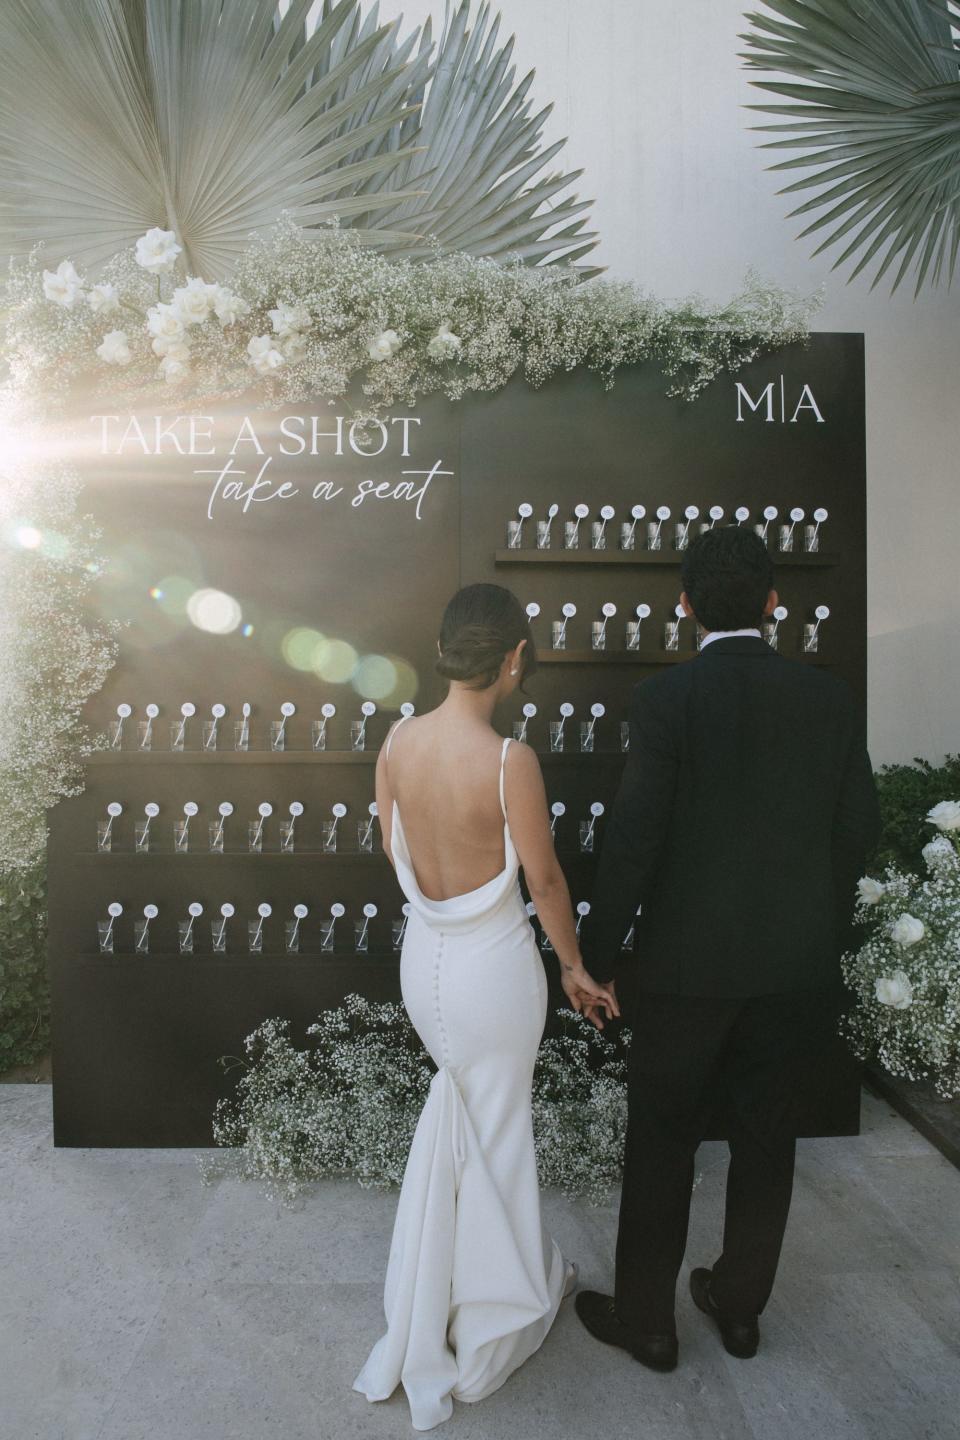 A bride and groom look at a sign that says "take a shot, take a seat."